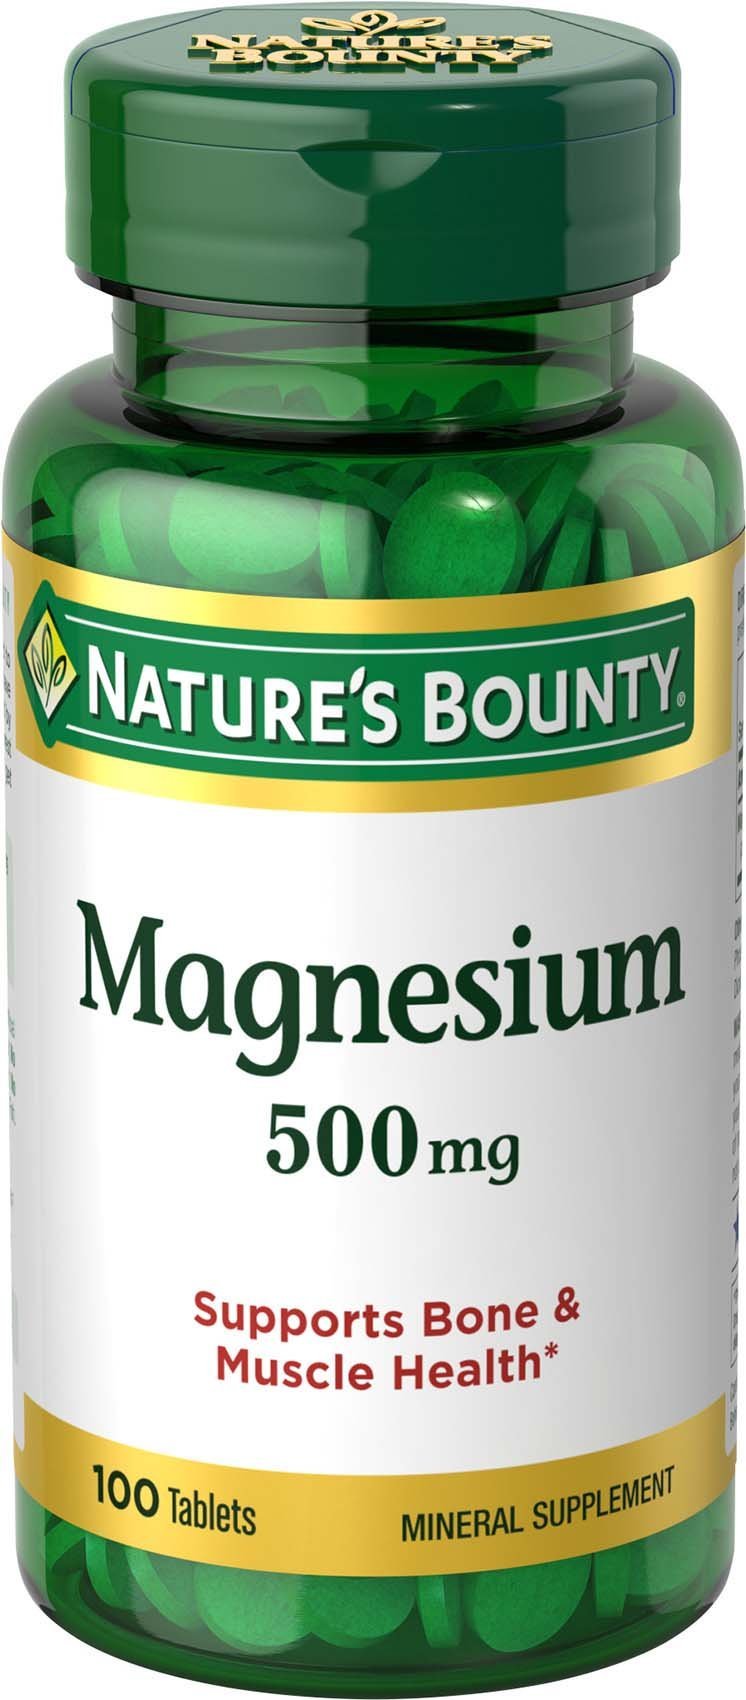 Nature's Bounty Magnesium, 500 mg Coated Tablets, Mineral Supplement, Supports Bone and Muscle Health, Gluten Free, Vegetarian, 100 Count (Pack of 3) 100 Count (Pack of 3) - BeesActive Australia